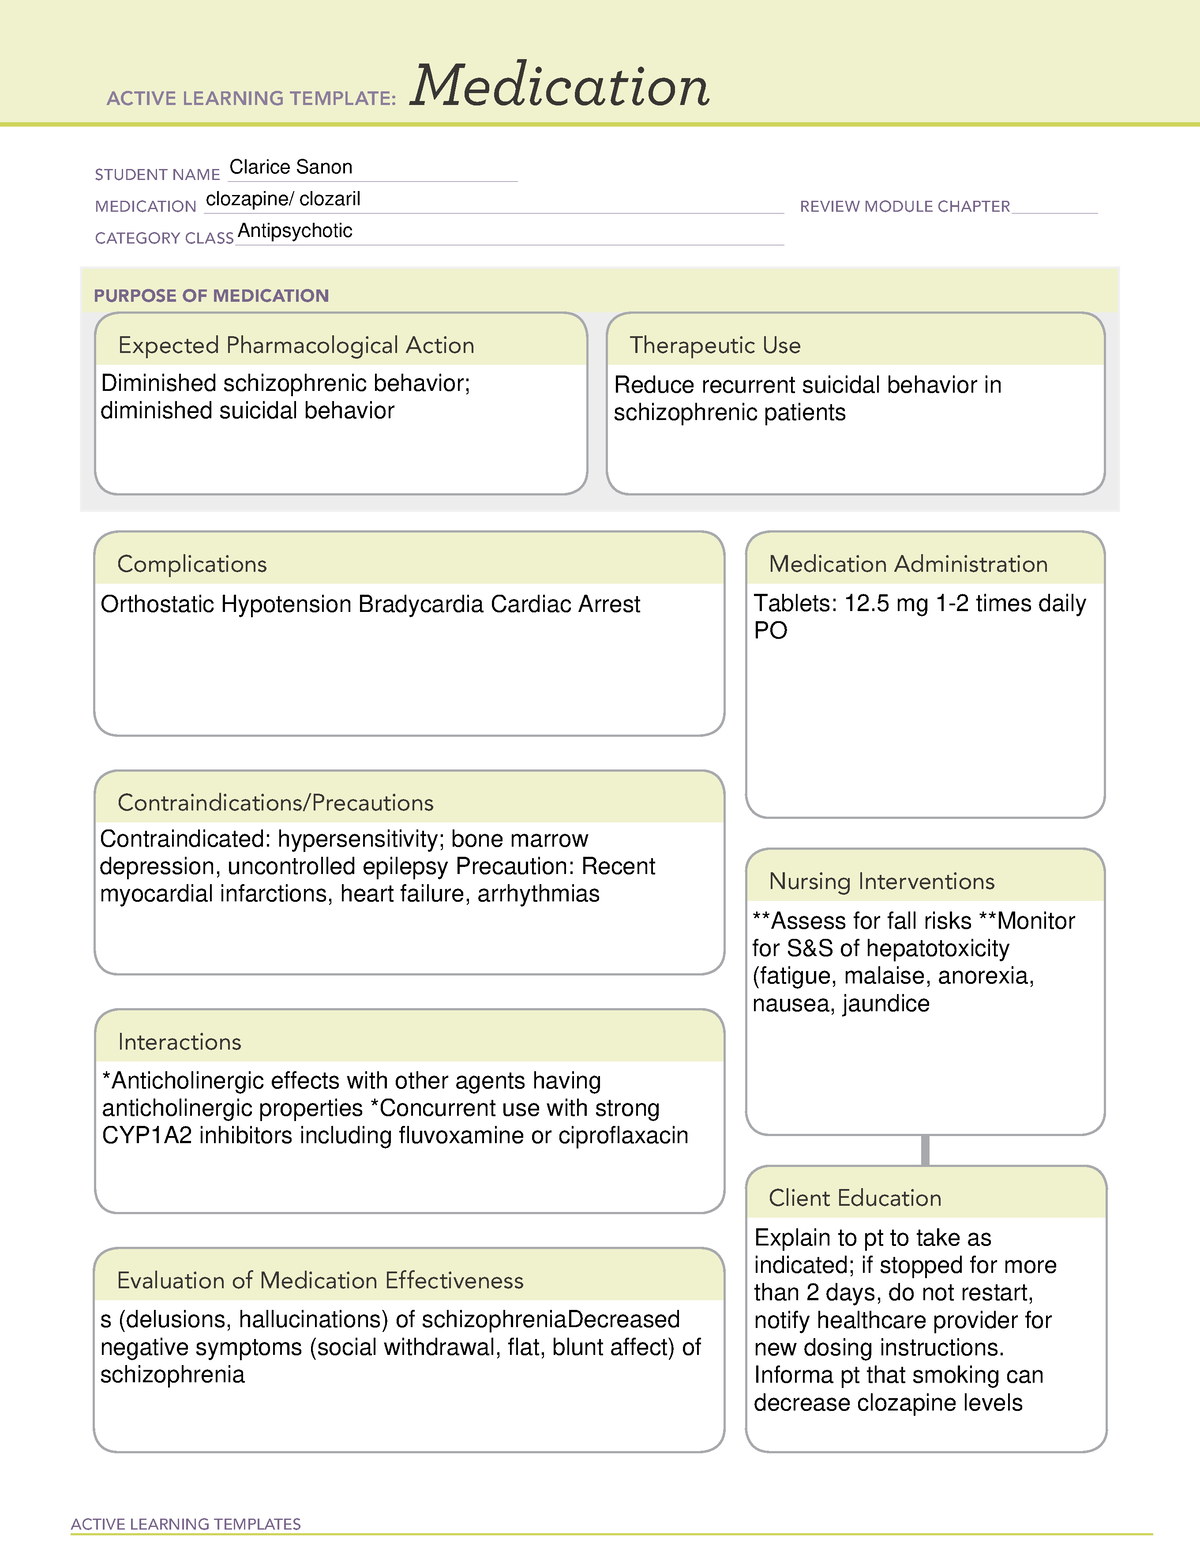 medication-clozapine-n-a-active-learning-templates-medication